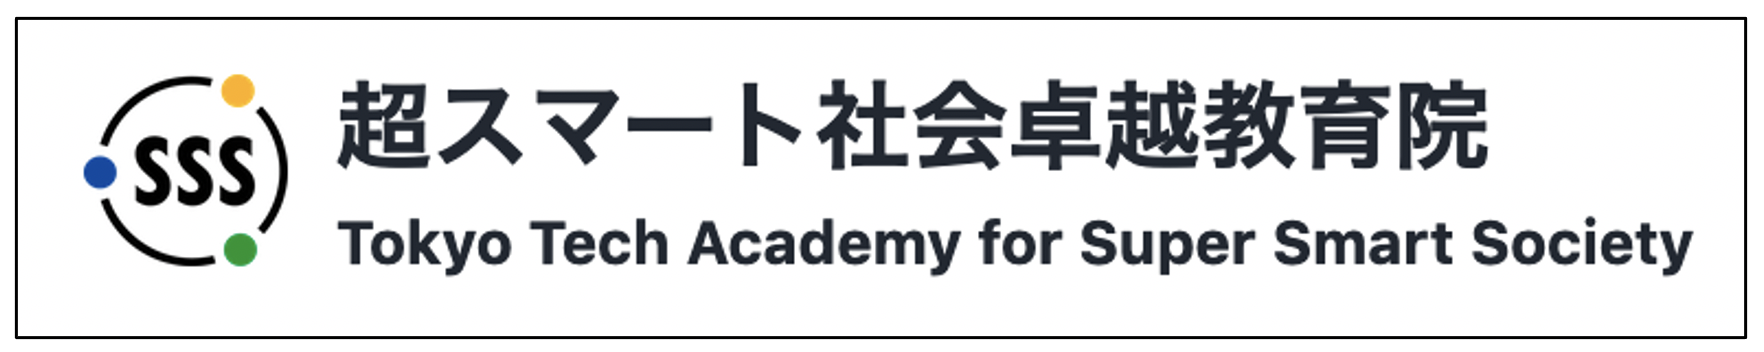 Tokyo Tech Academy for Super Smart Society
(SSS)